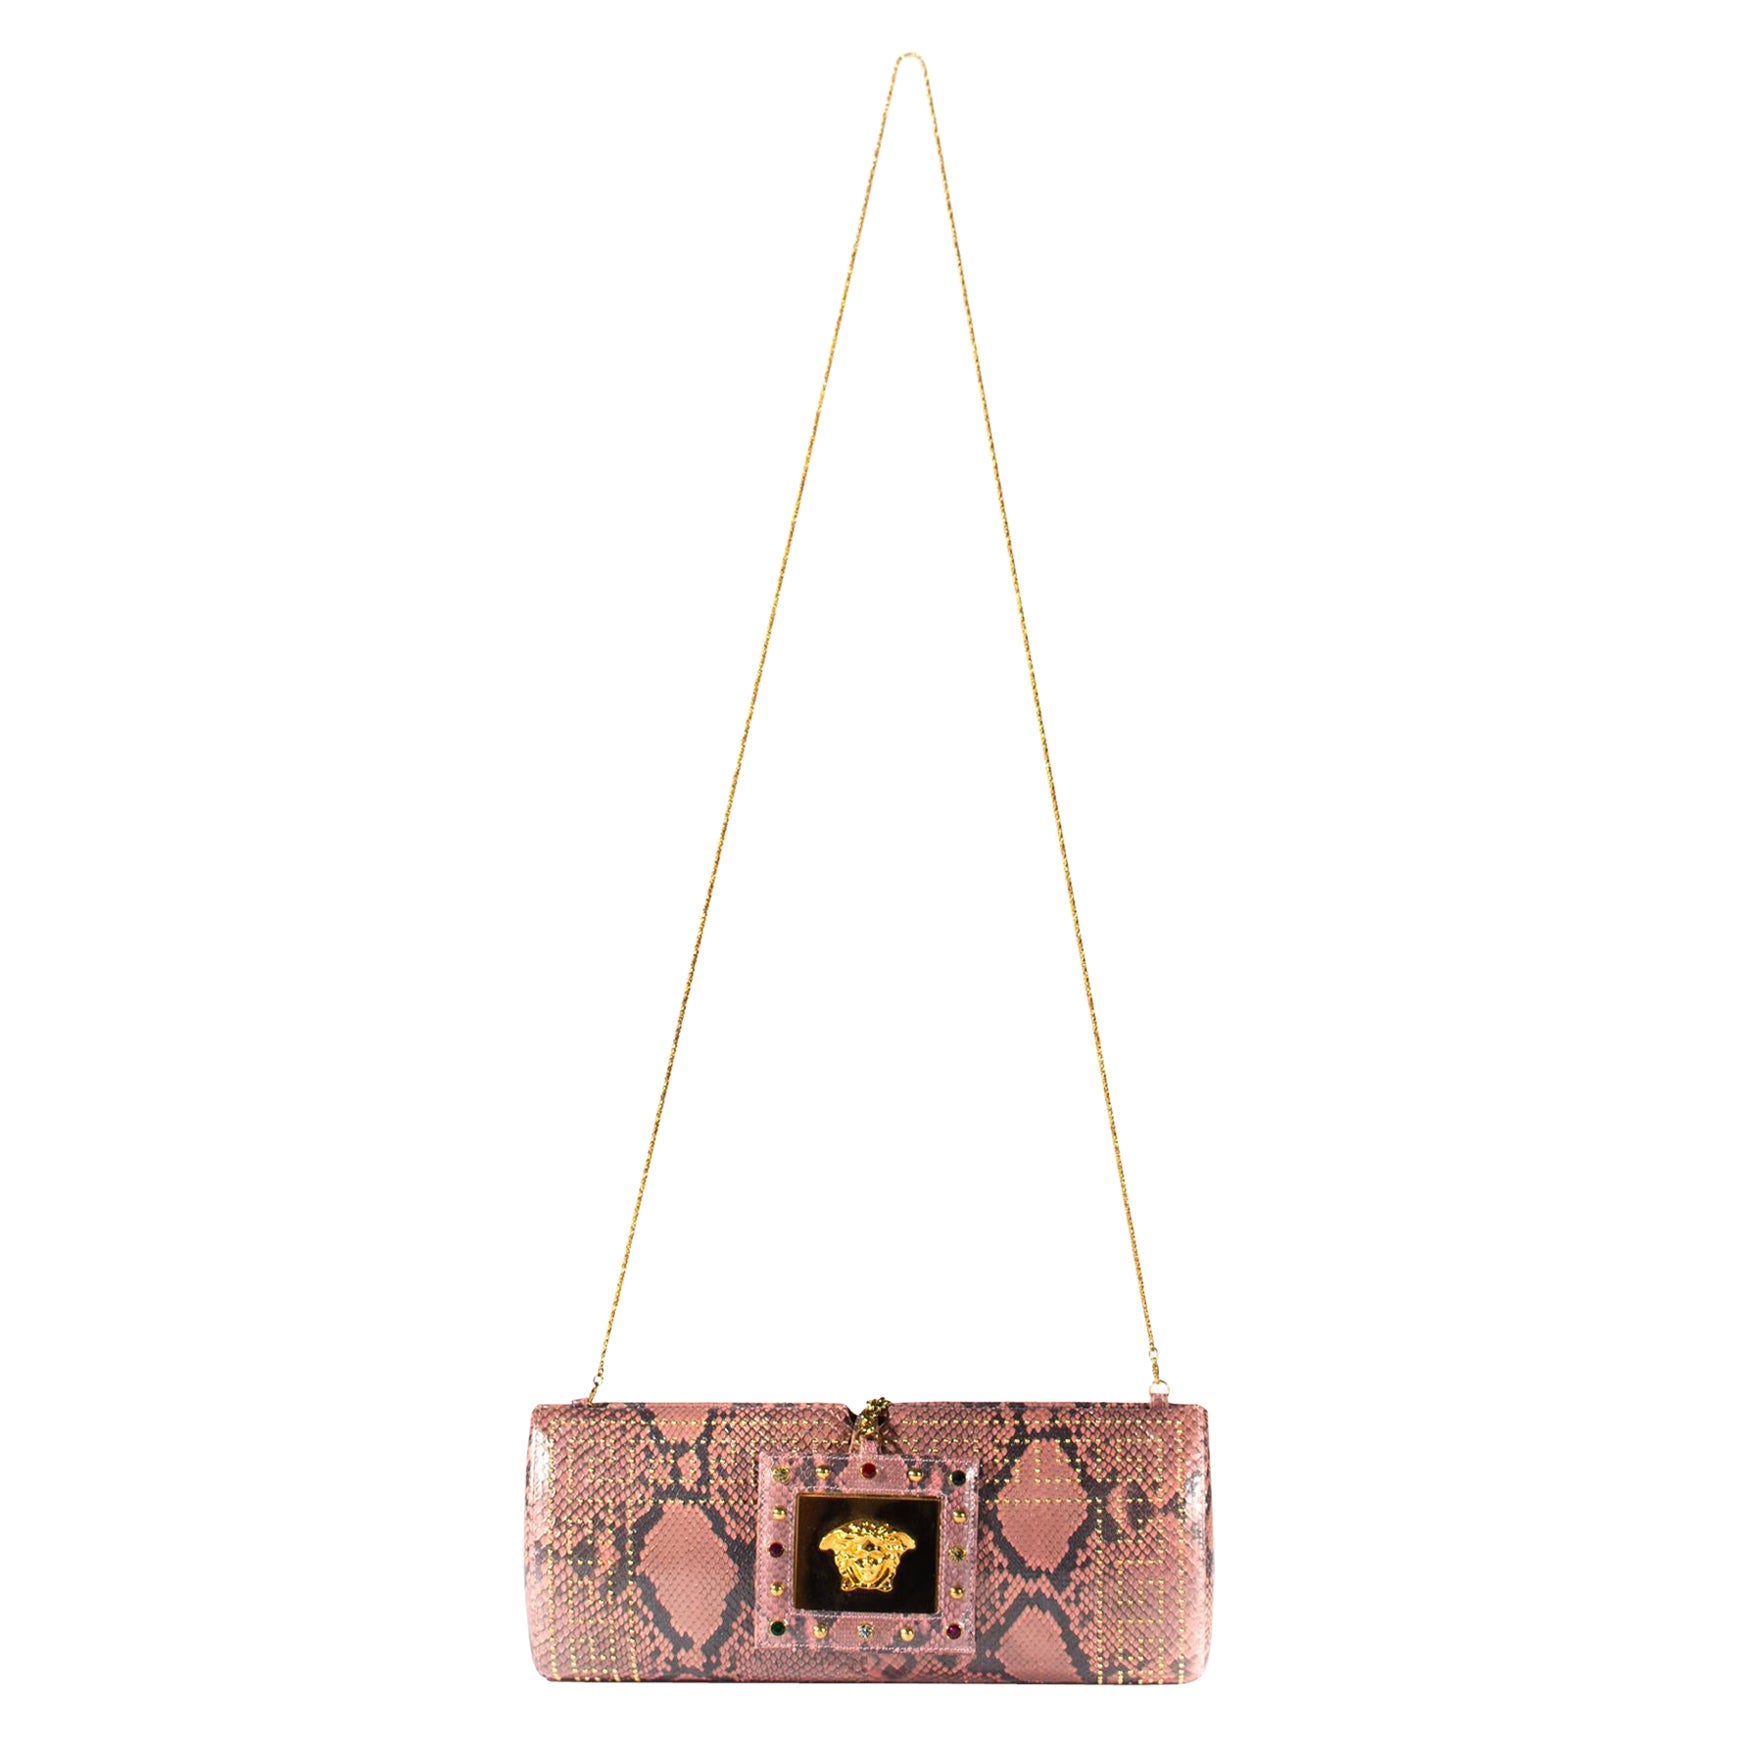 Donatella Versace for Gianni Versace Crossbody Bags and Messenger Bags